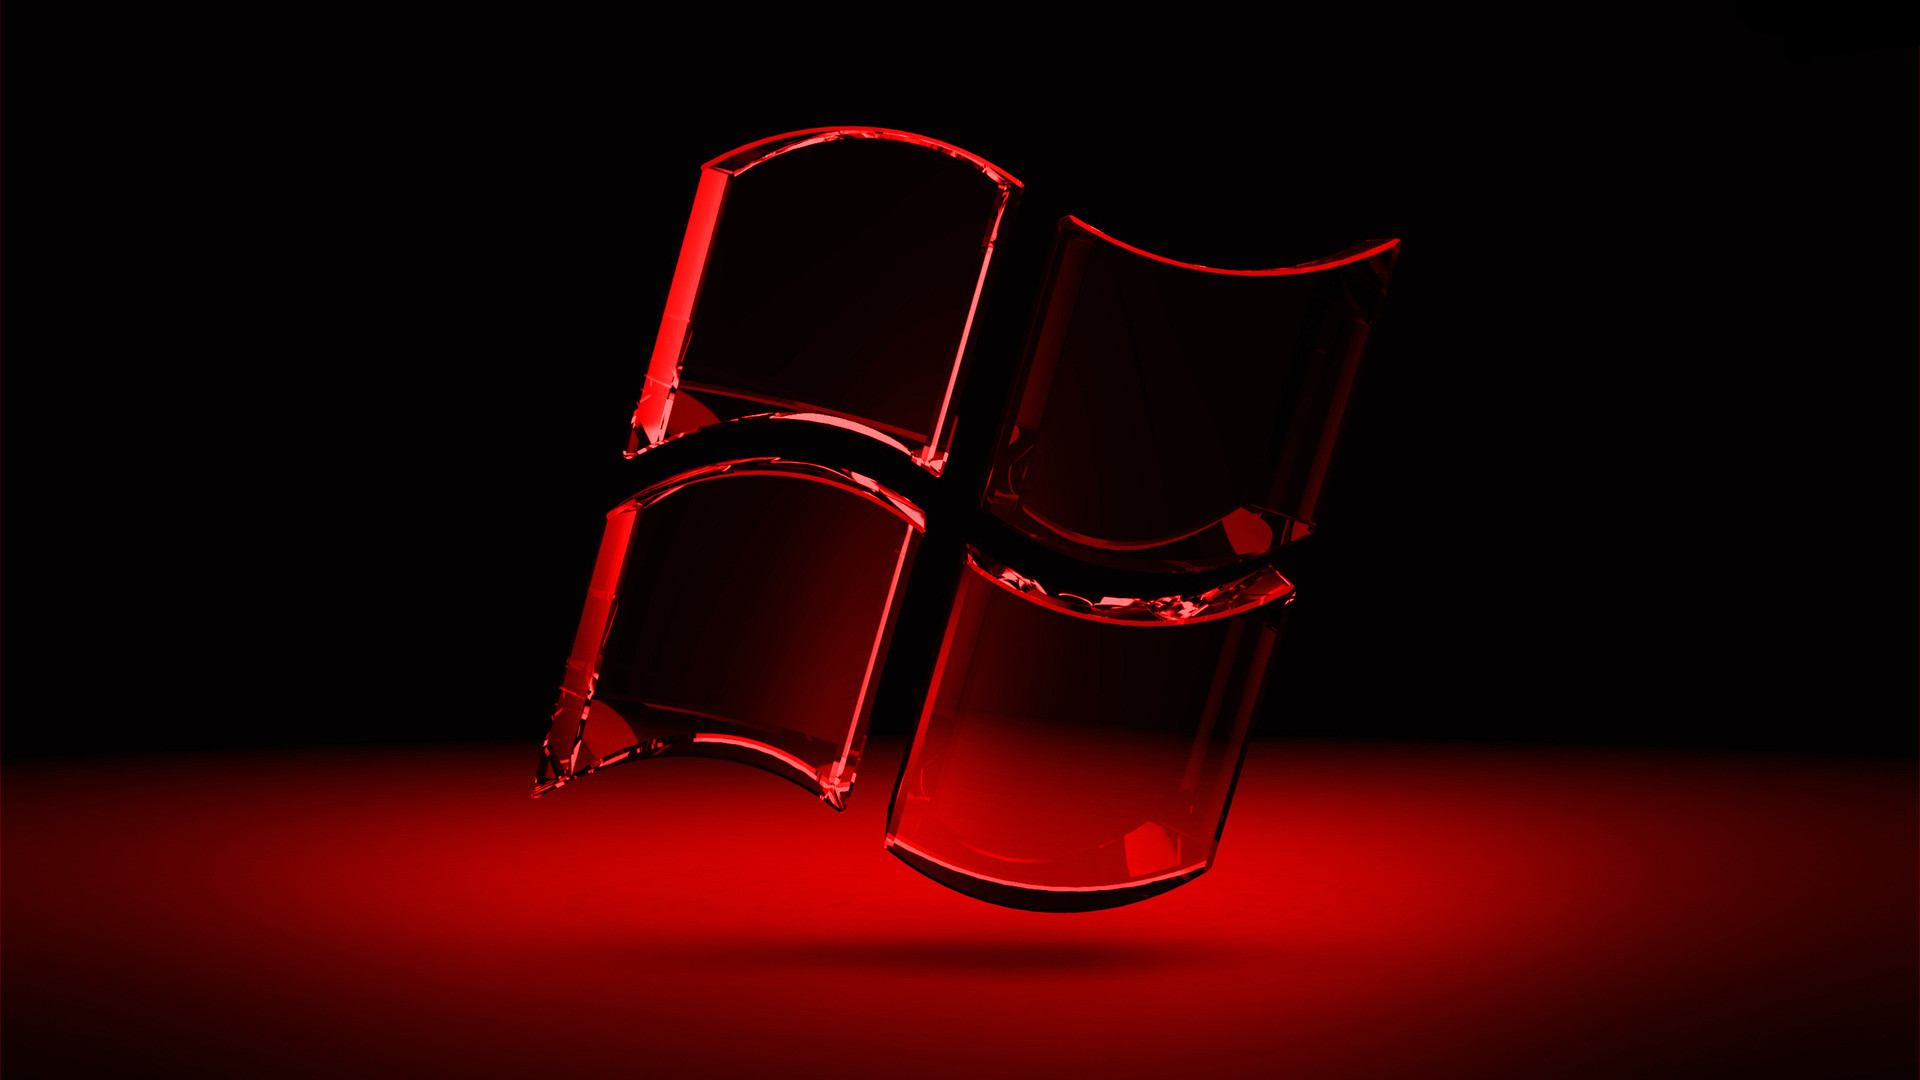 1920x1080 Image detail for Red Abstract free beautiful wallpaper download | HD  Wallpapers | Pinterest | Desktop backgrounds, Red wallpaper and Hd wallpaper